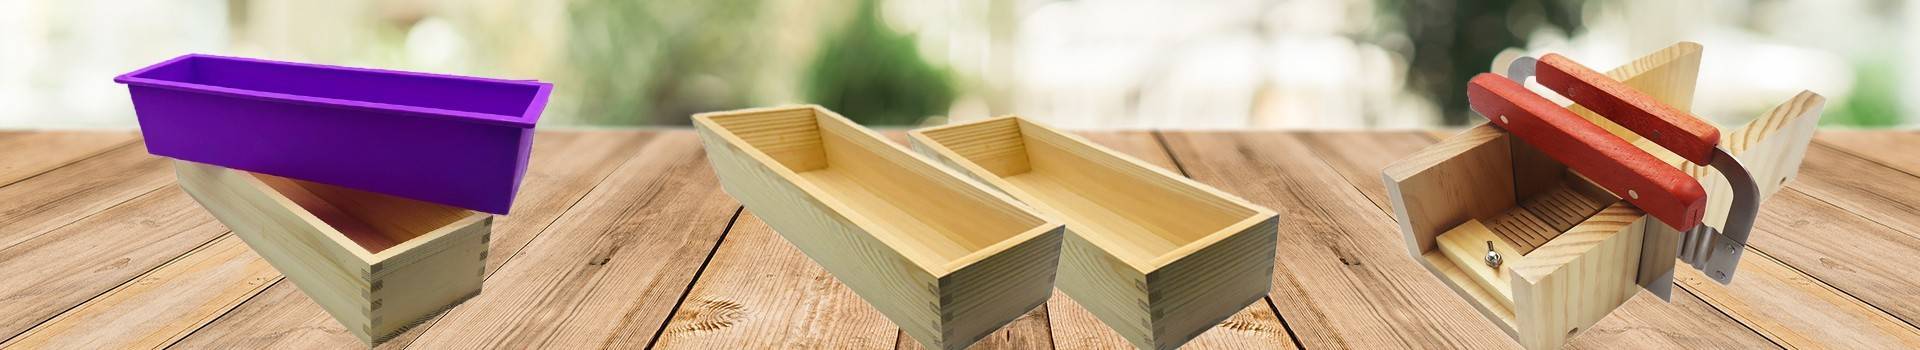 Wooden molds for soaps making